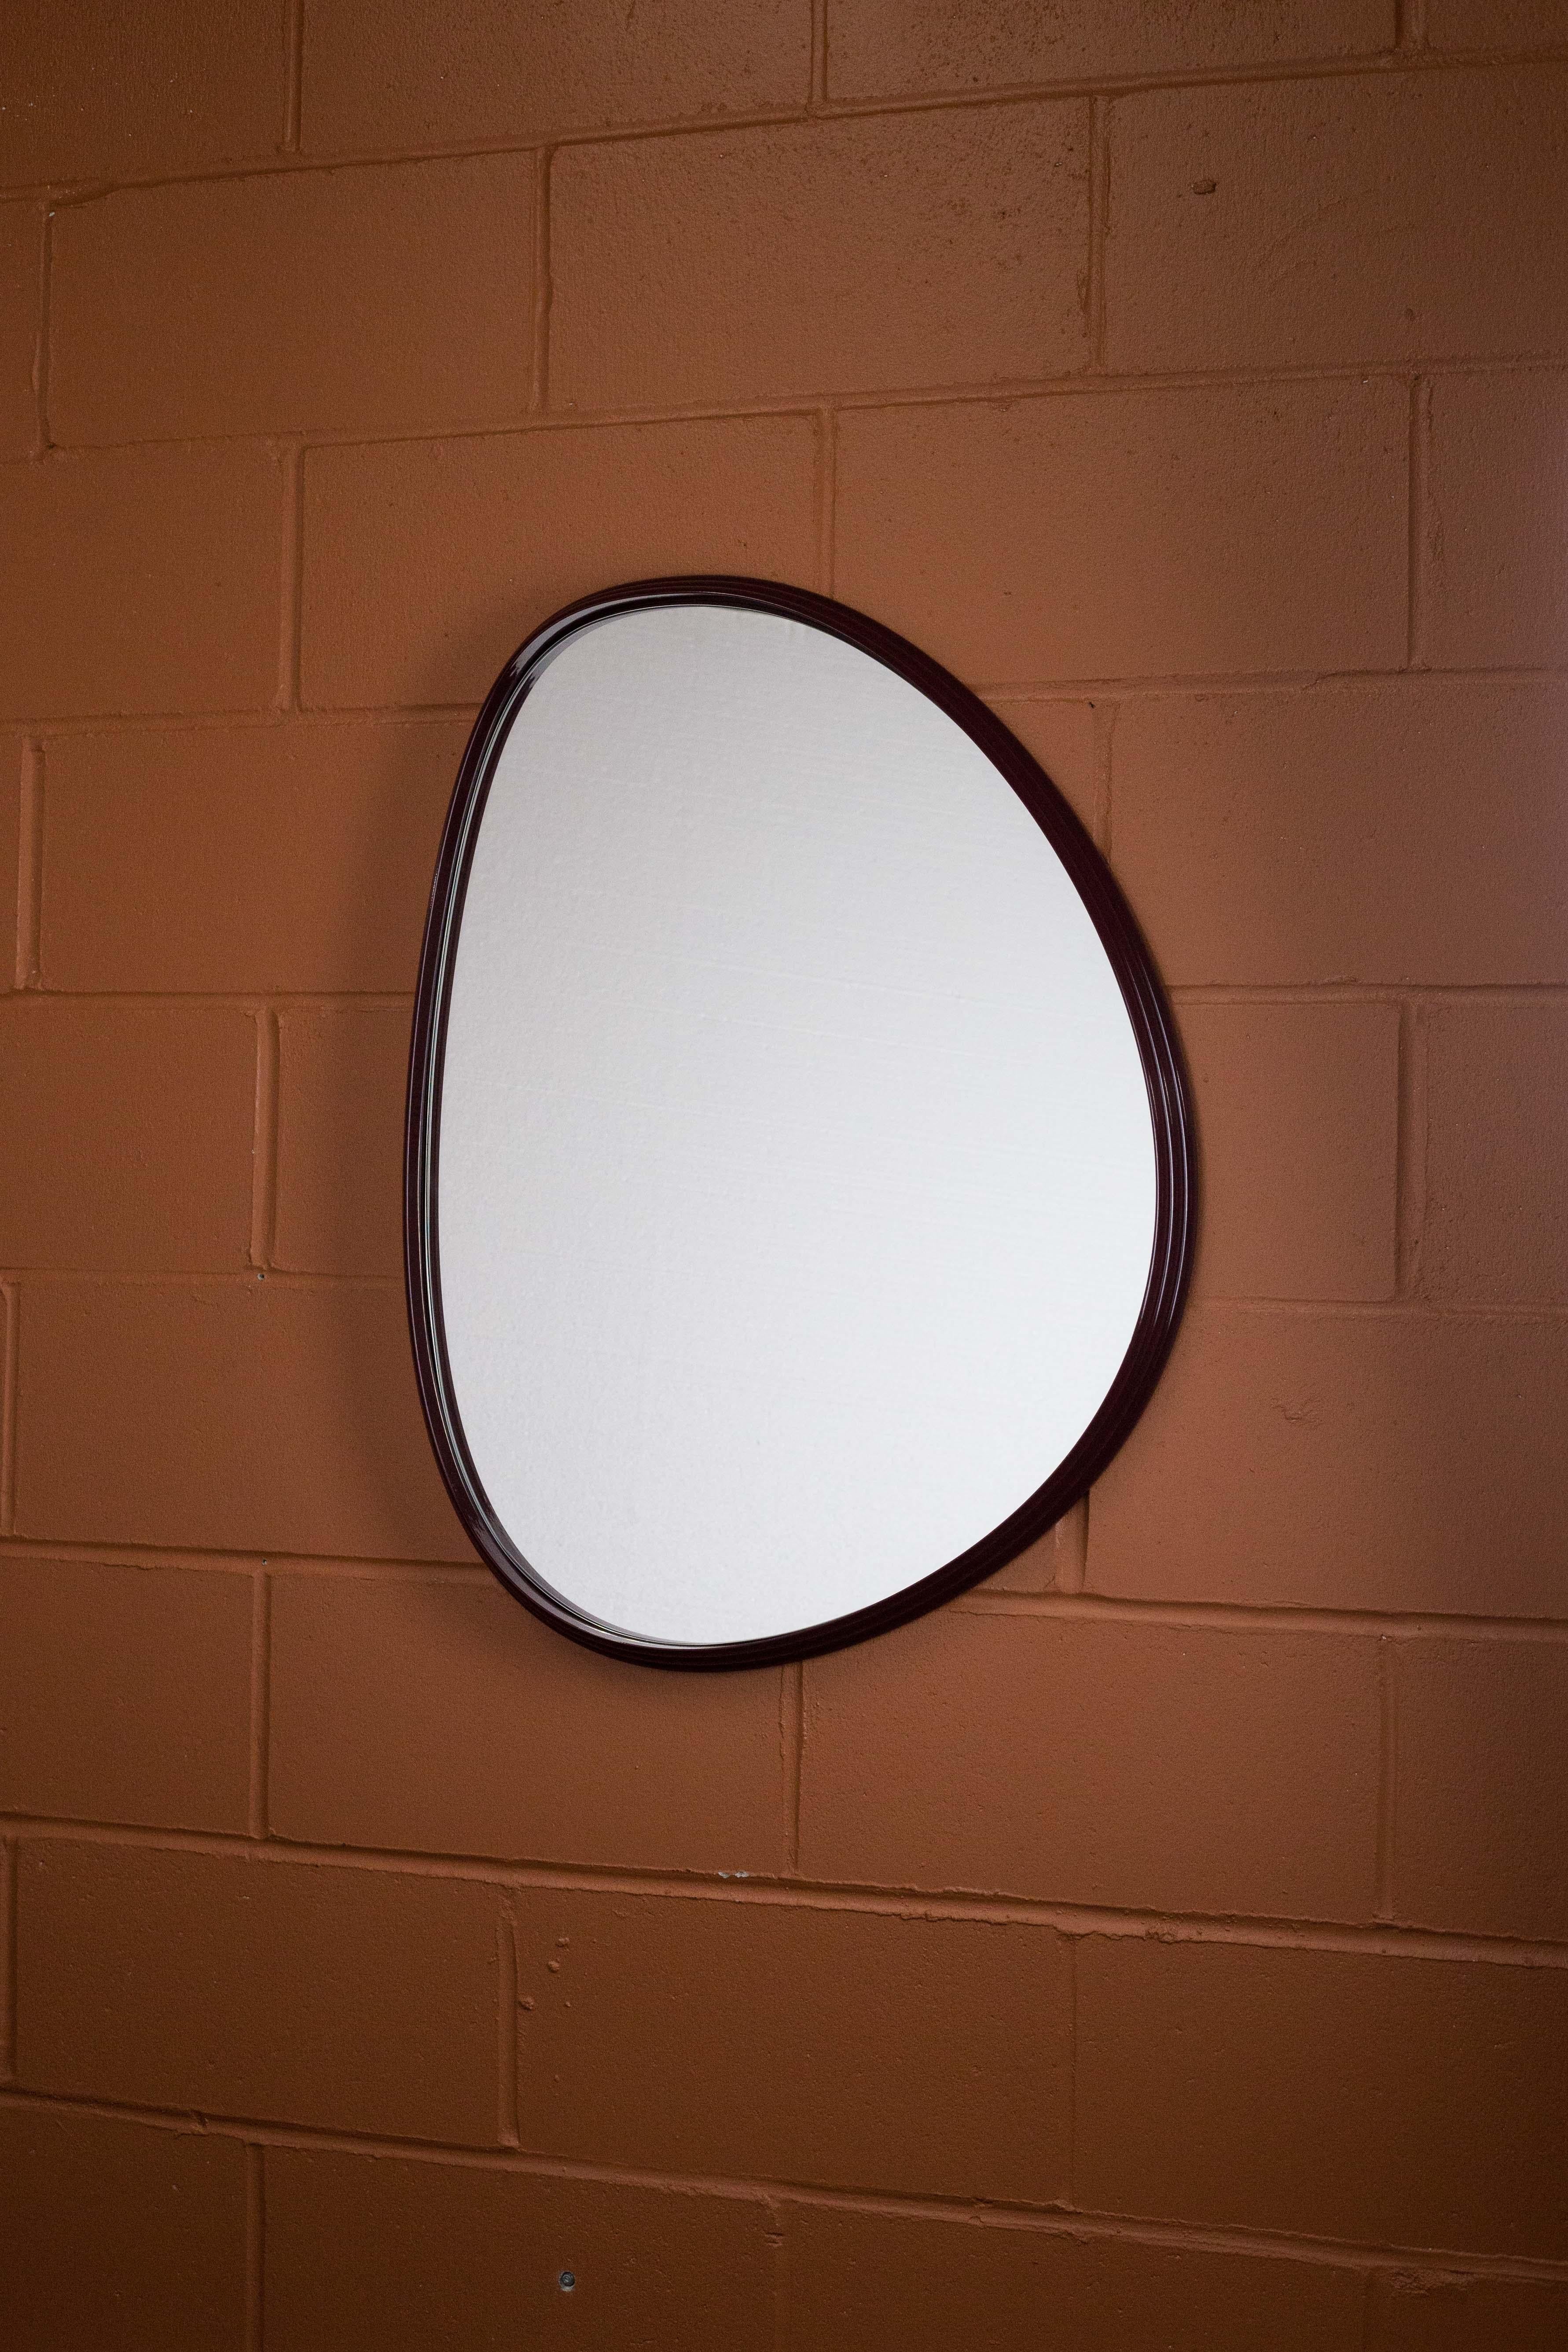 Organically shaped mirrors, drawn by hand and resolved in machined solid aluminum - the ambition is to create a tension with the precise form of the imperfect shape.

Polished, plated, or painted finishes available.

Custom shape, sizing and